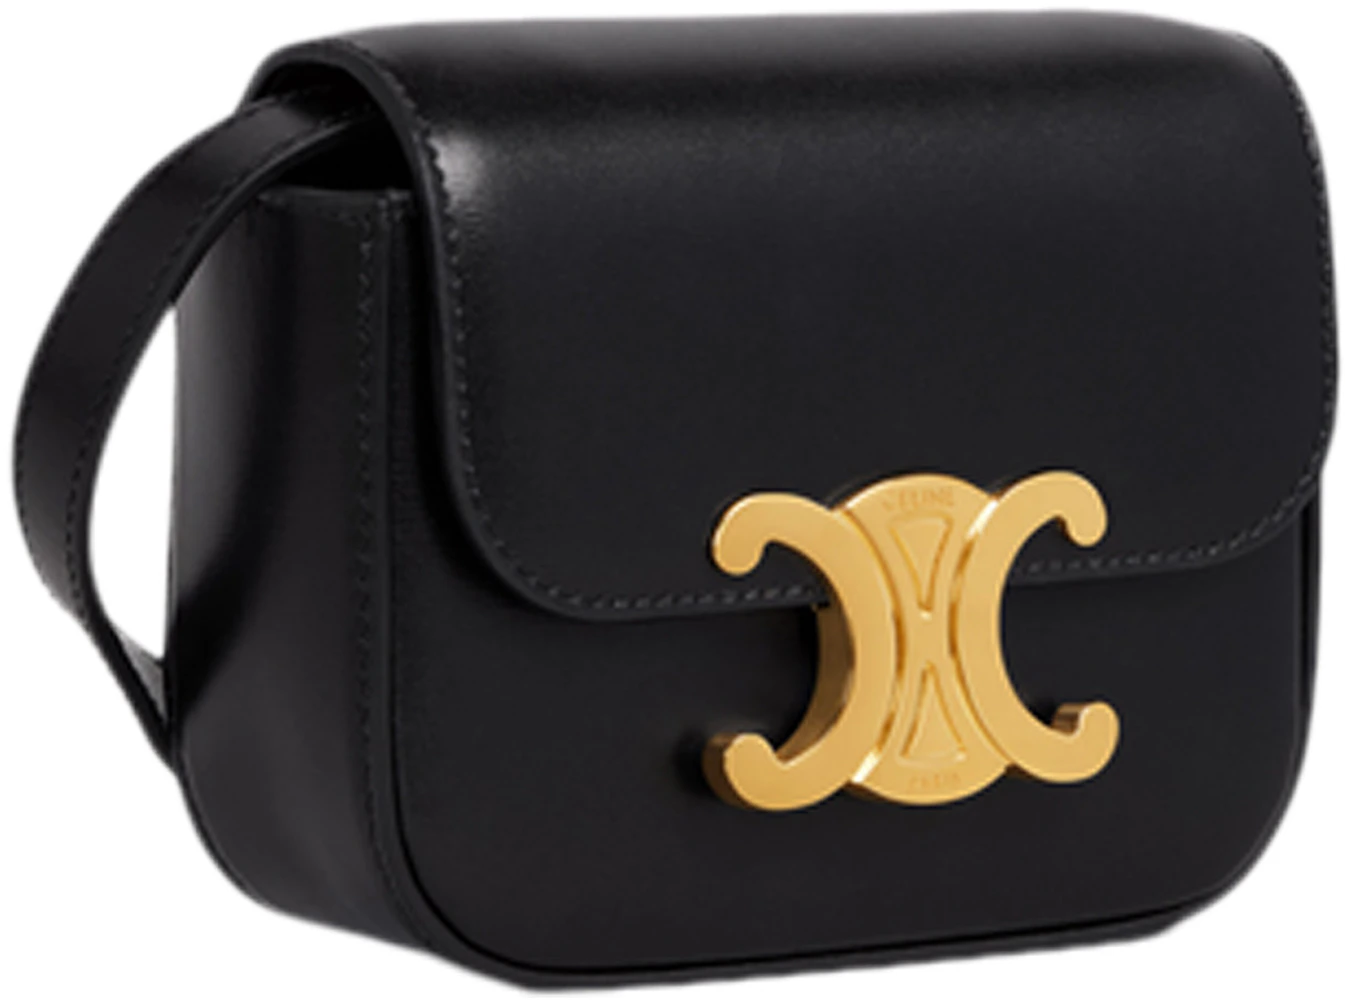 Triomphe chain leather crossbody bag Celine Black in Leather - 32138064